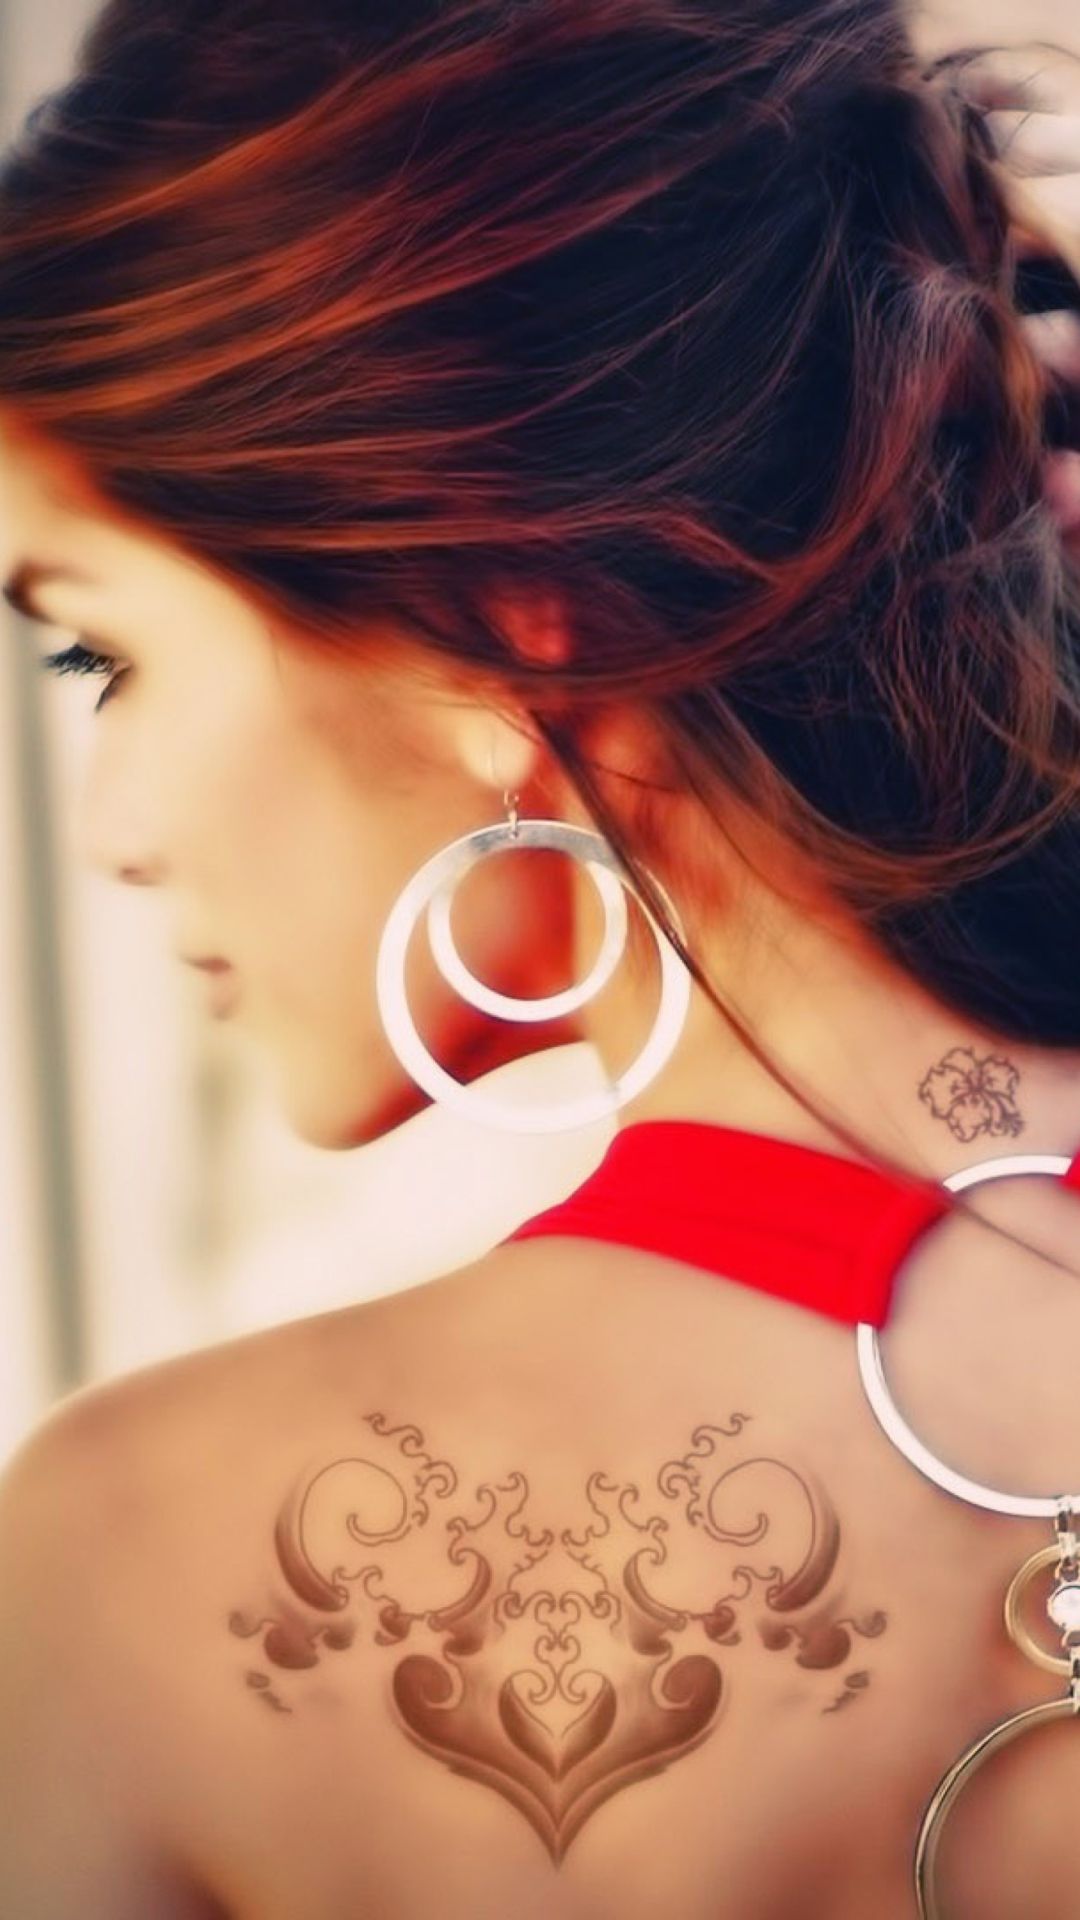 Girl With Tattoo On Her Back Wallpaper For Nokia Lumia 